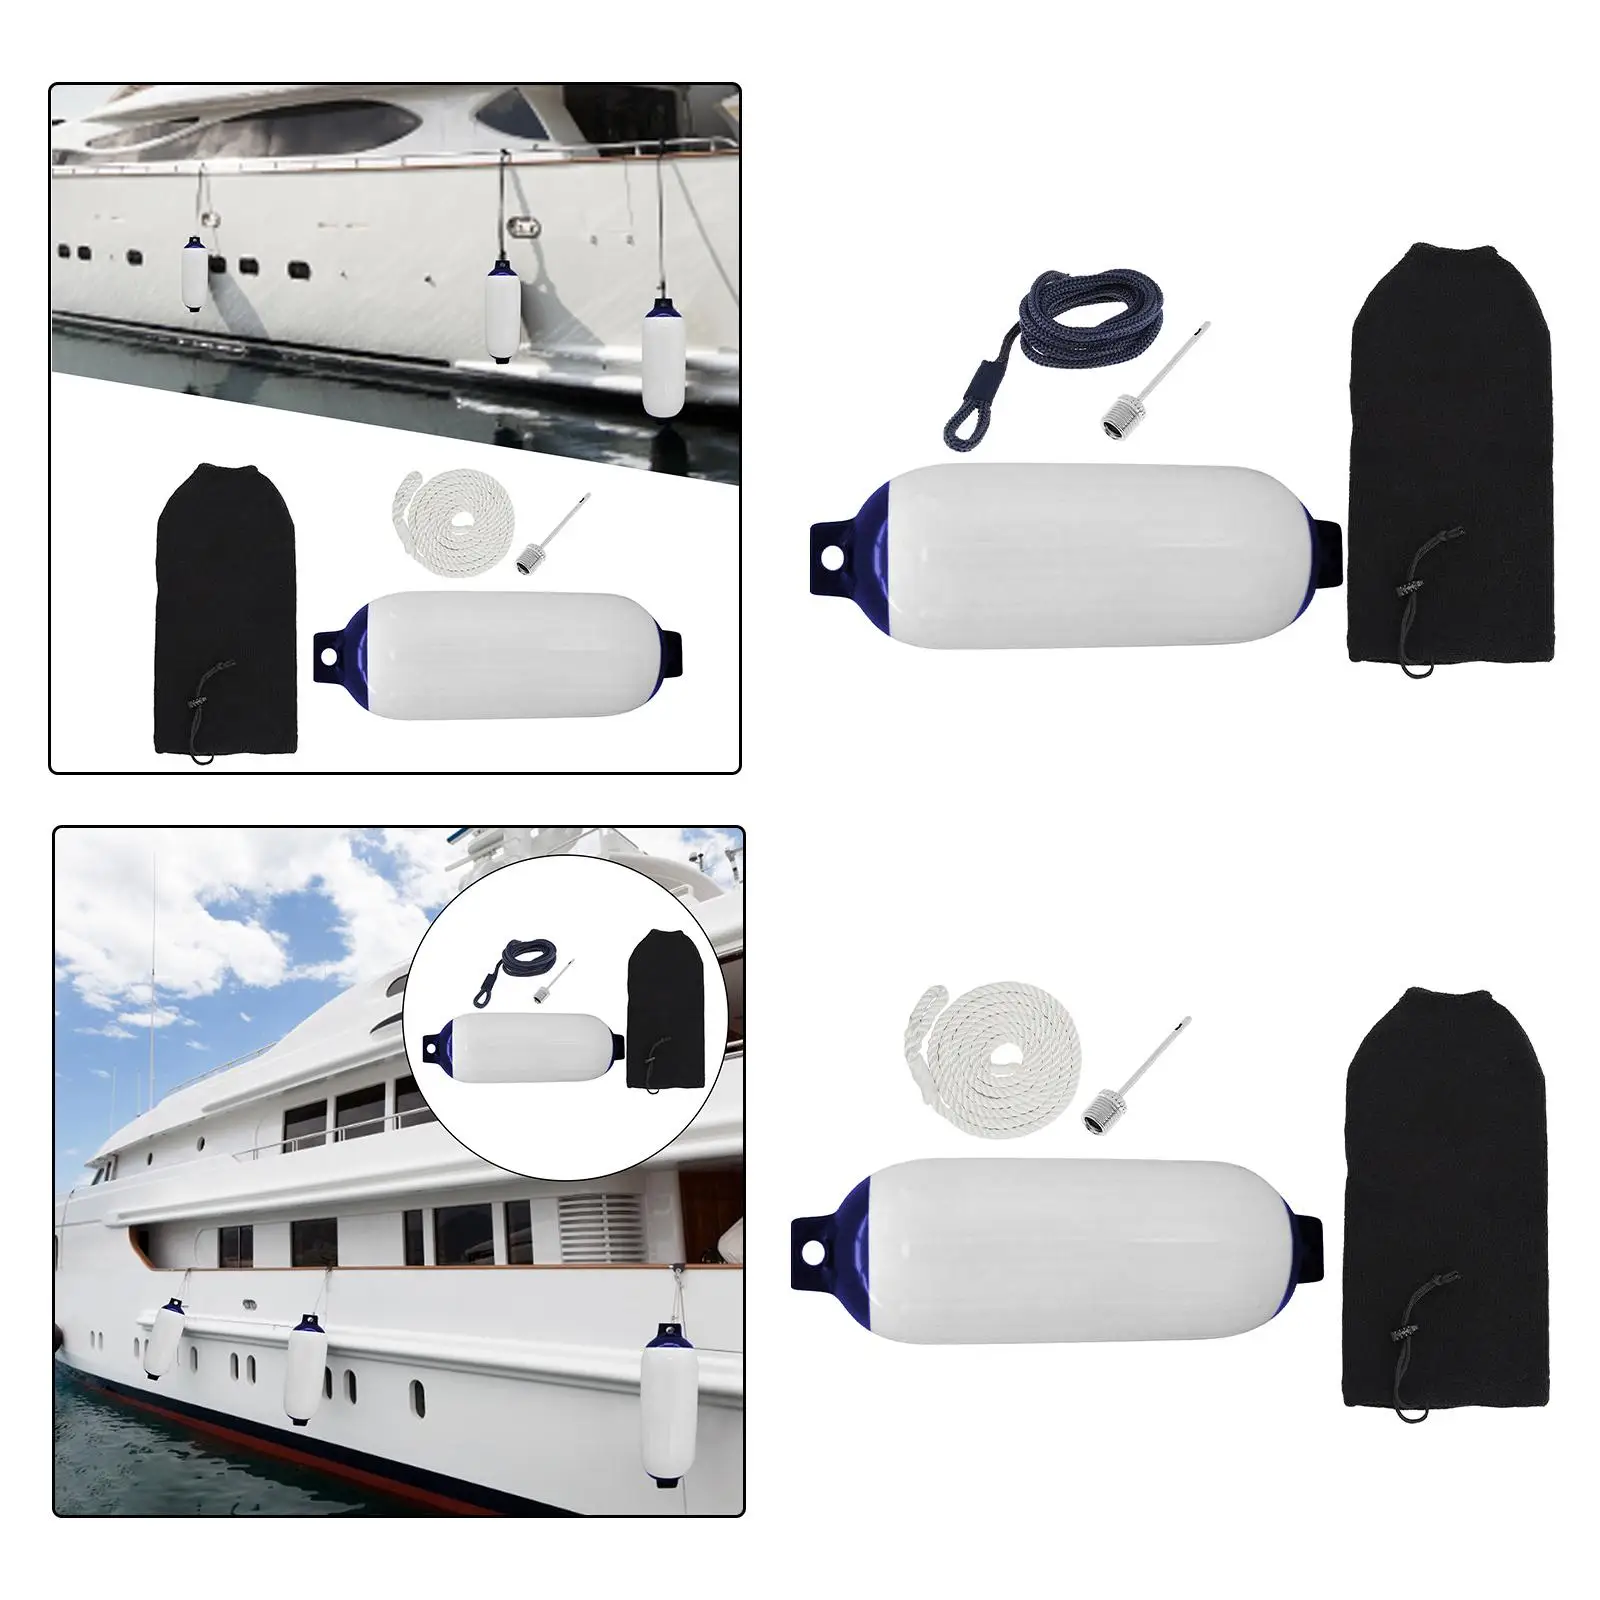 Boat Fender Shield Protection 11x40cm Use to Bass Boats Sport Boats Sailboats Accessories with Cover Boat Bumpers for Pontoon